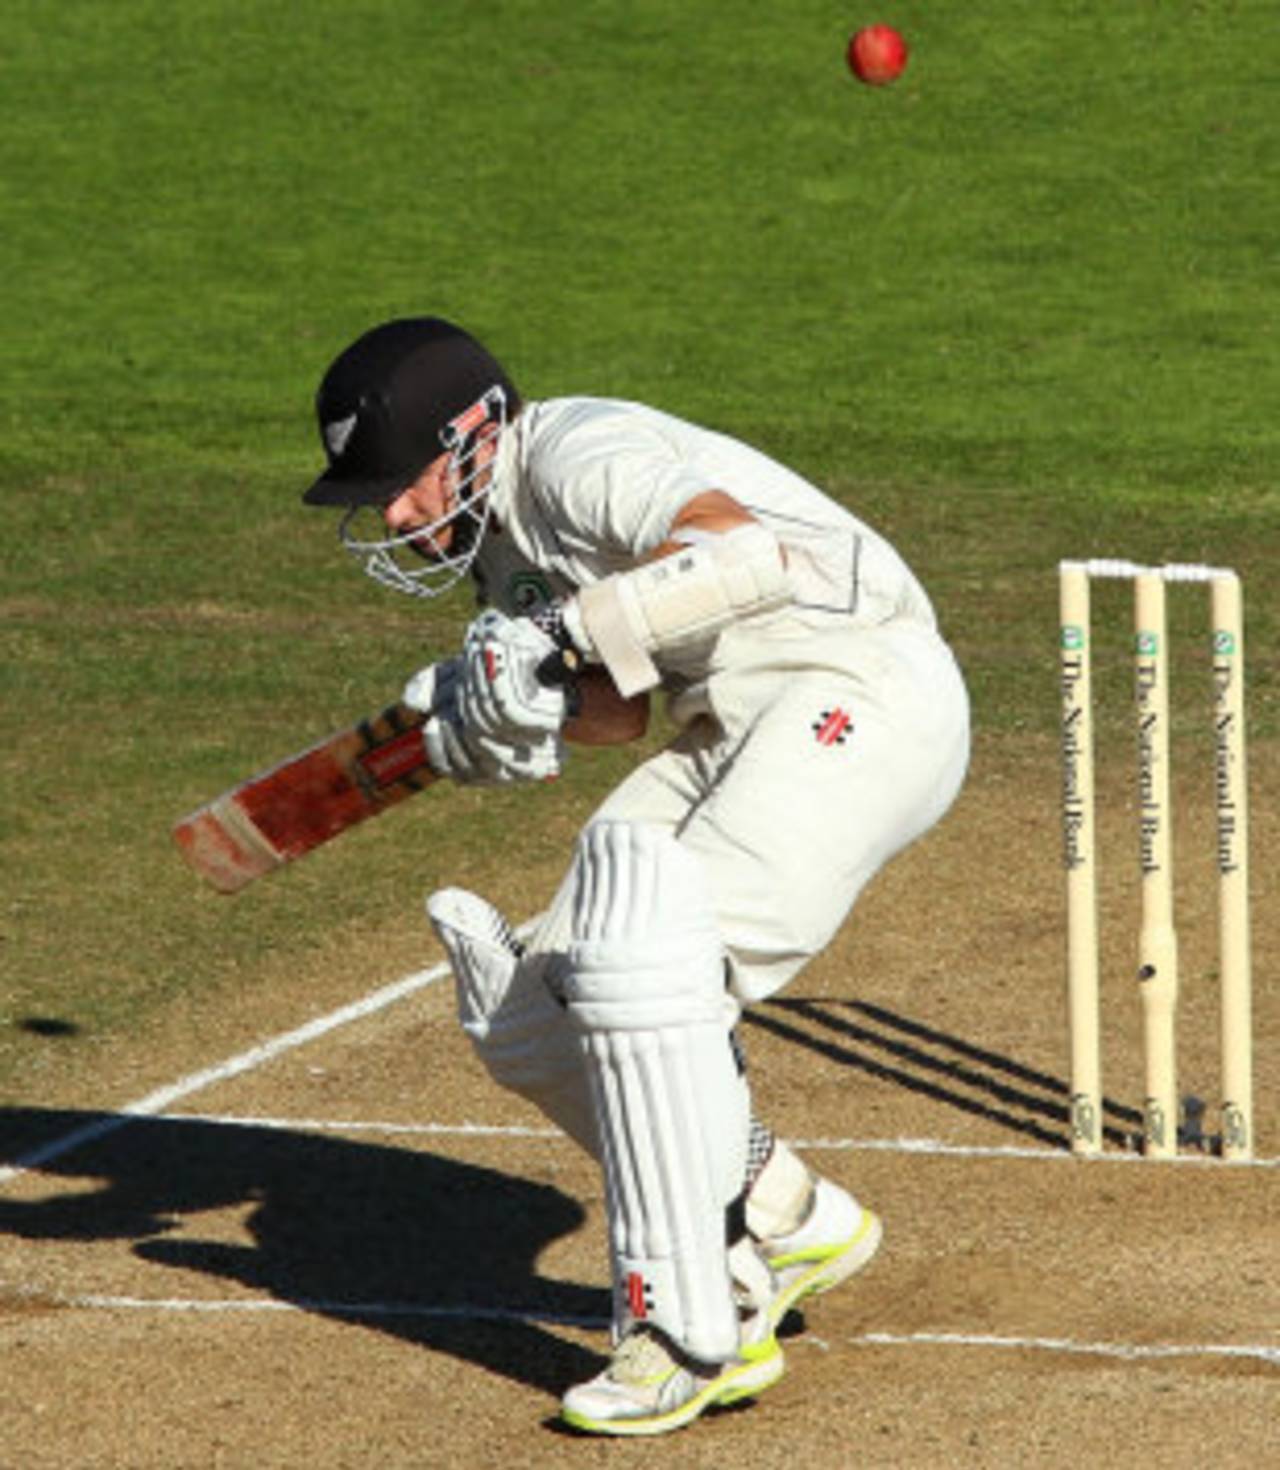 Kane Williamson ducks under a bouncer, New Zealand v South Africa, 3rd Test, Wellington, 5th day, March 27, 2012